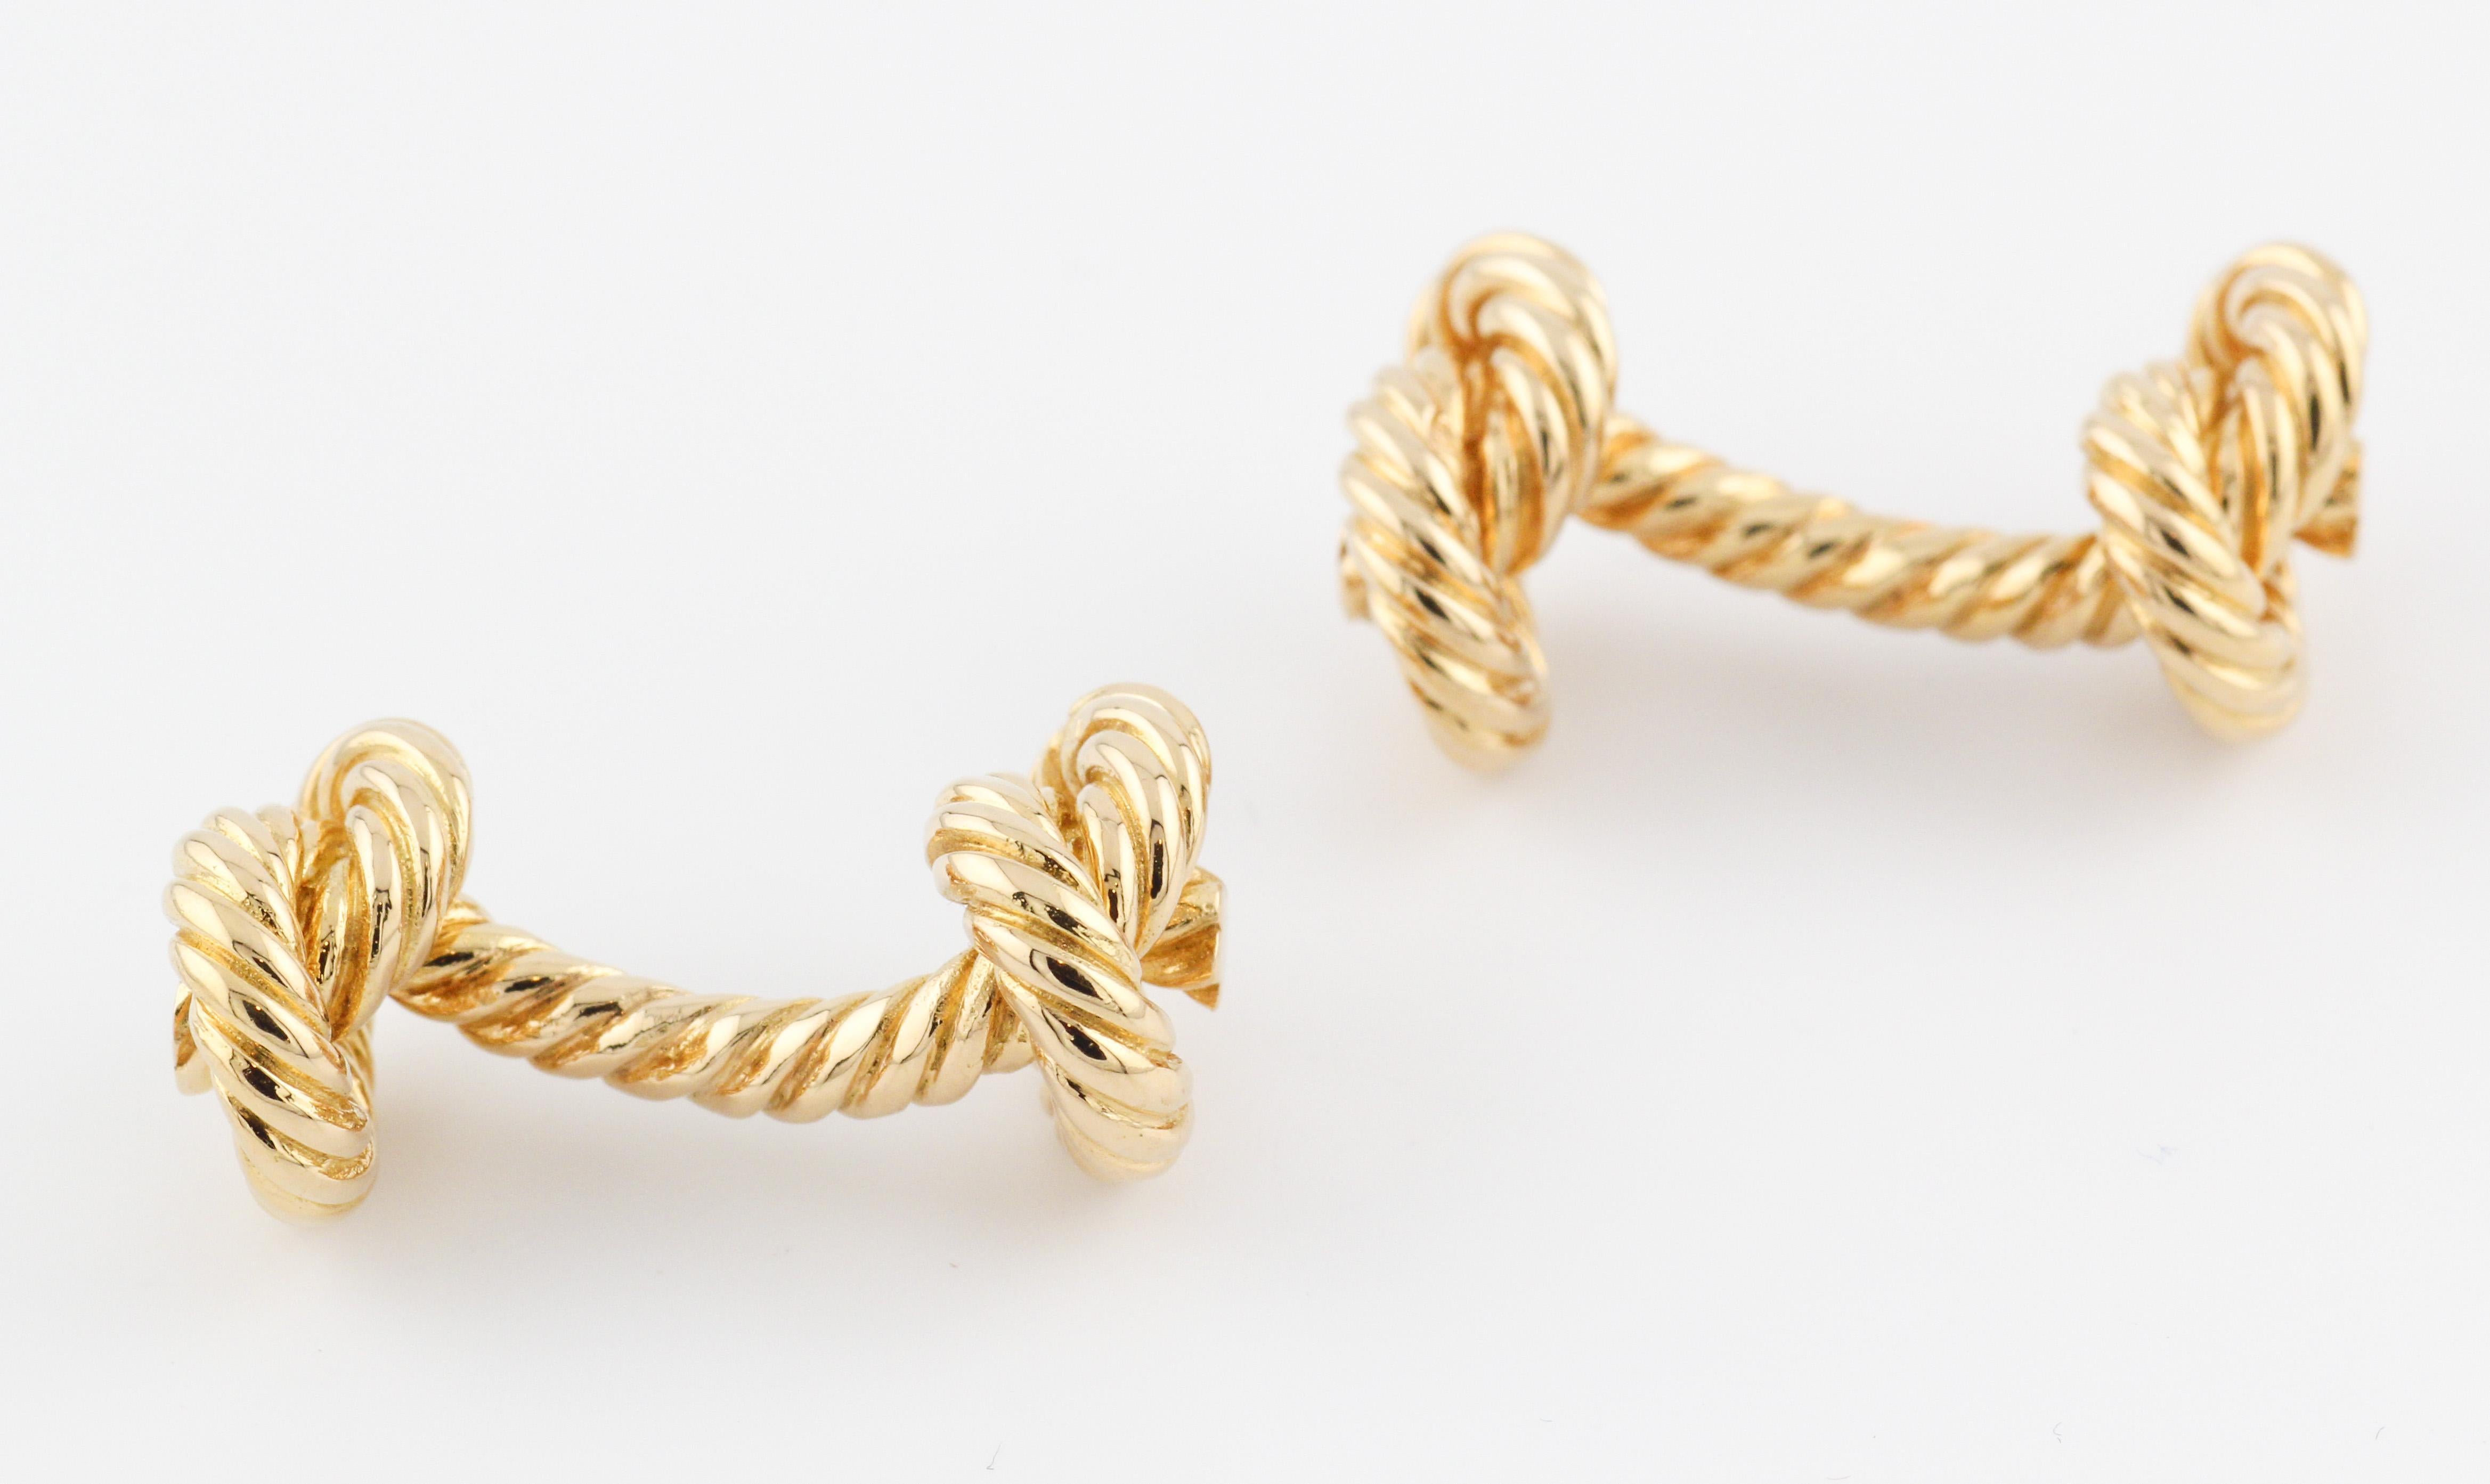 Immerse yourself in the world of rare luxury with these extraordinary Hermes 18K Yellow Gold Rope Knot Cufflinks. Elegance and craftsmanship converge in this exceptional pair, showcasing the iconic Hermes aesthetic with a distinctive touch.

Crafted